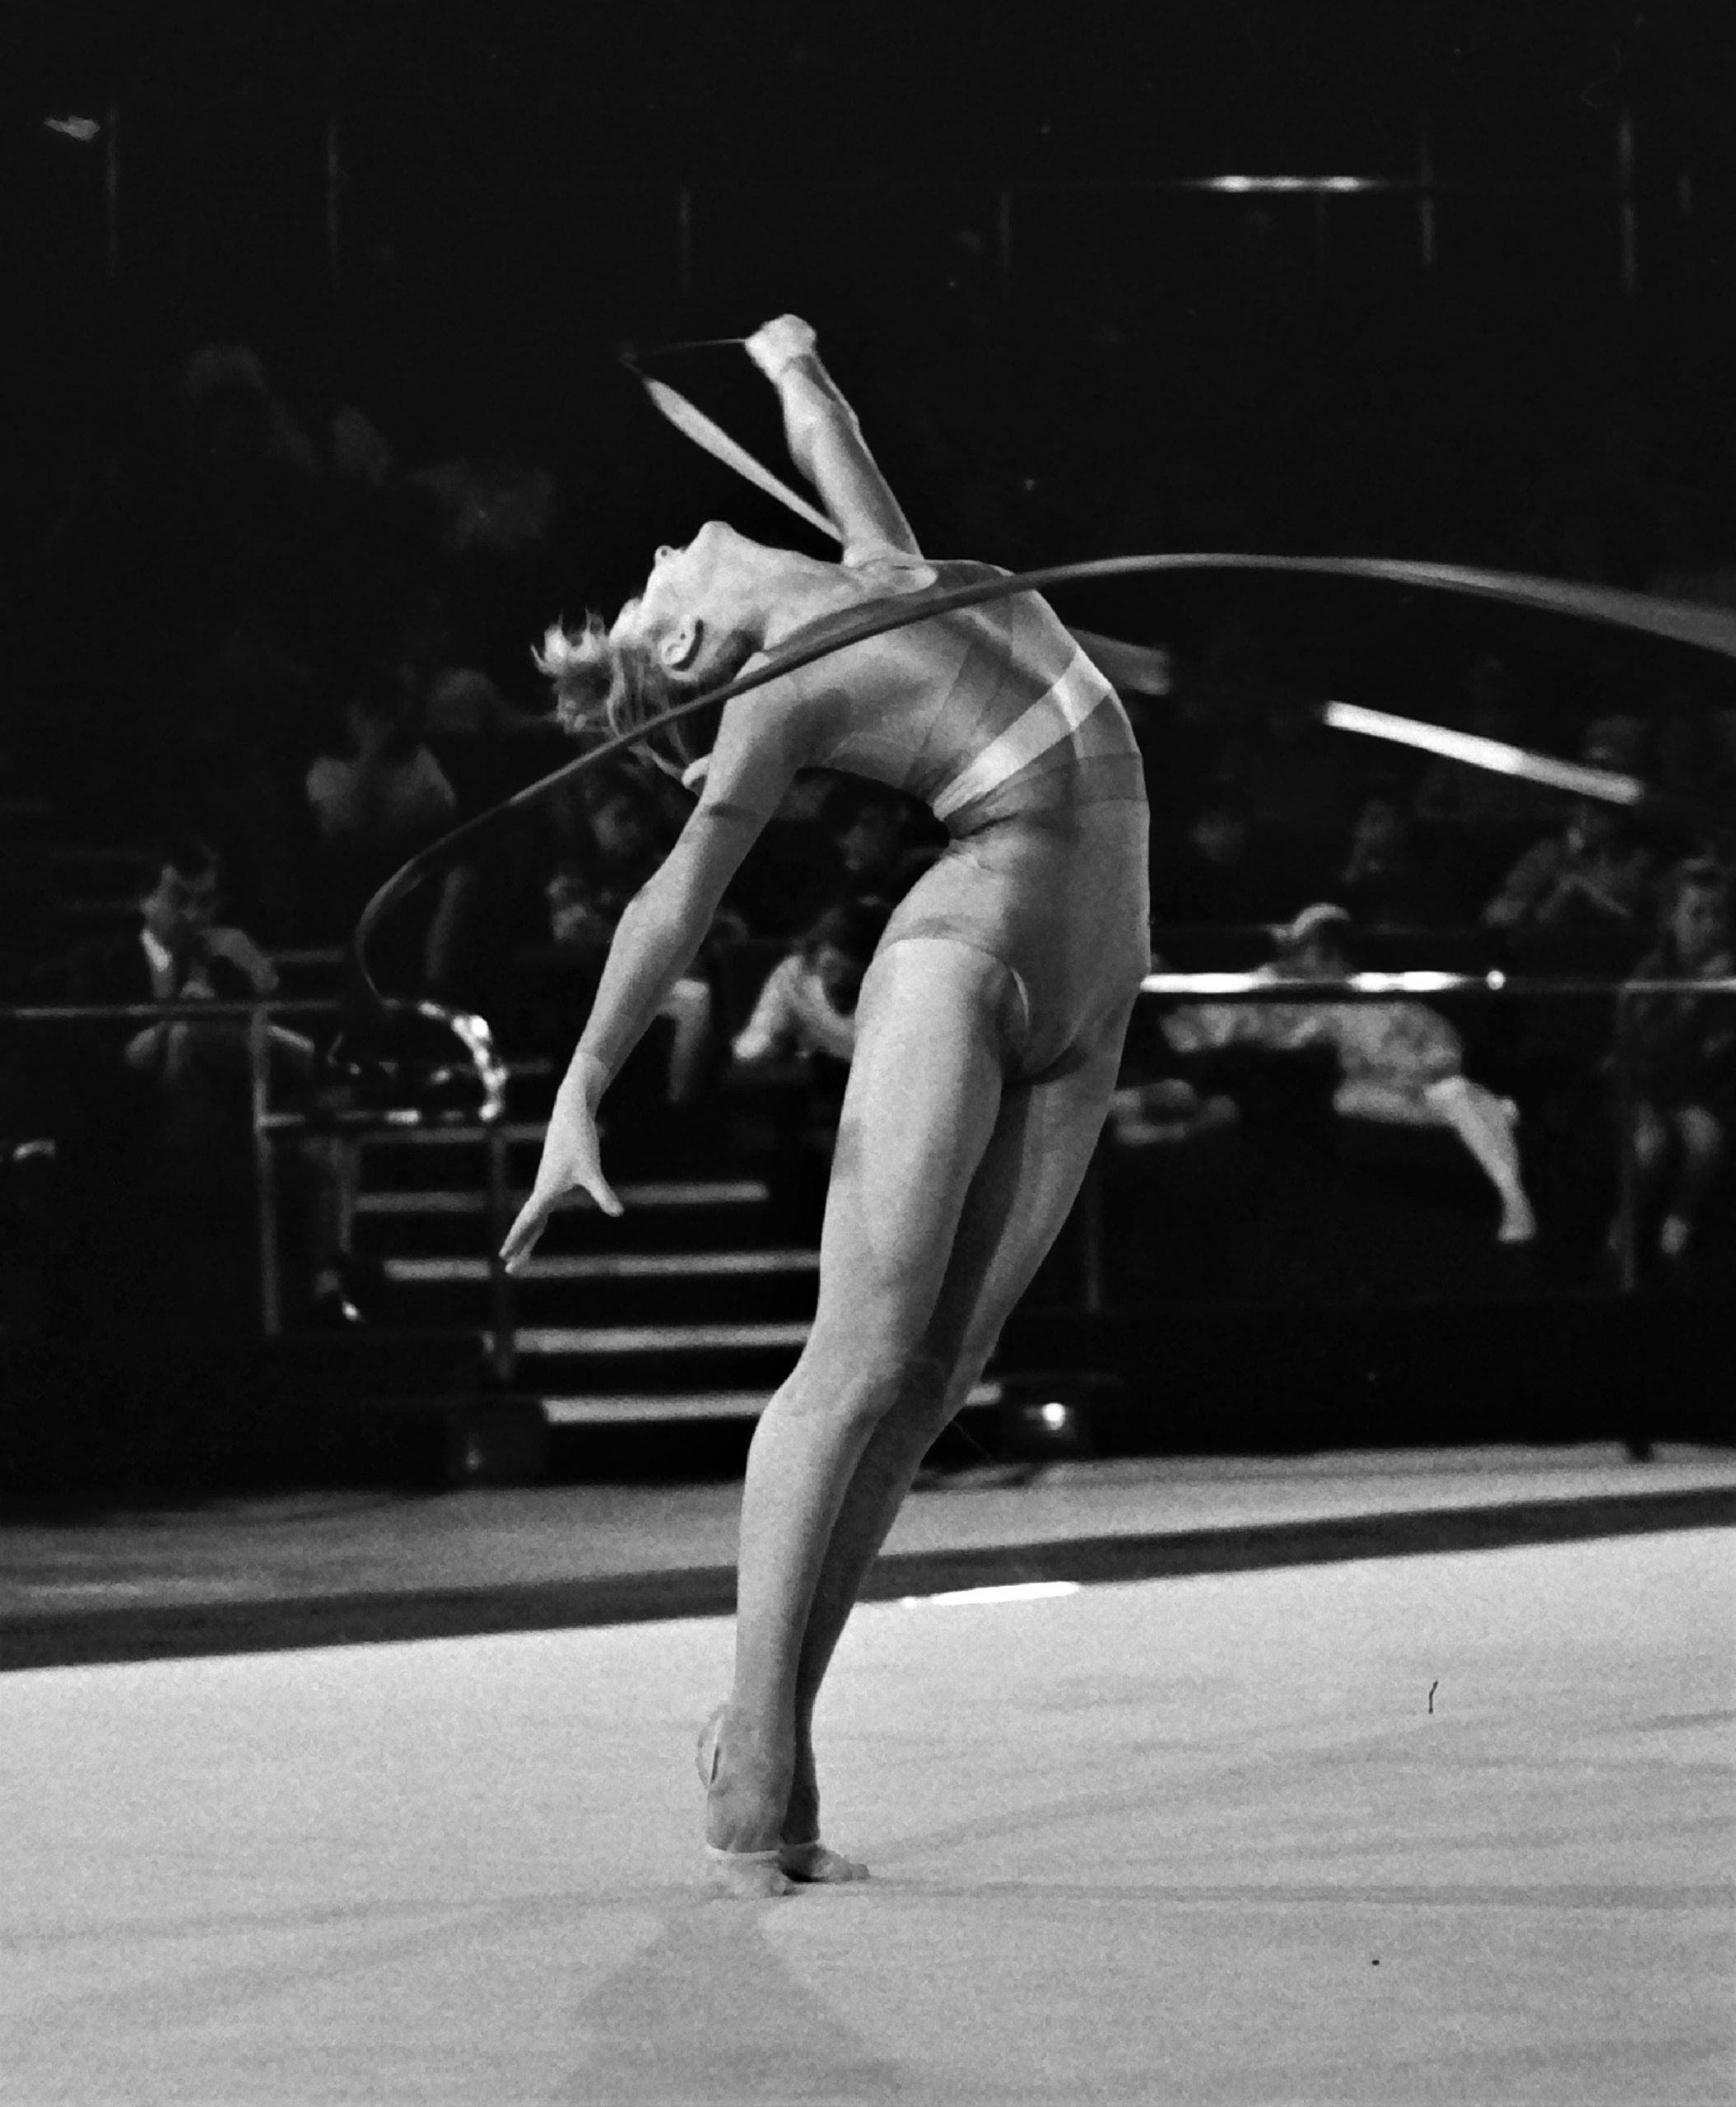 Above - British Gymnastics Rhythmic Champion Jacquie Leavy with ball in 1985 - photo Alan Burrows